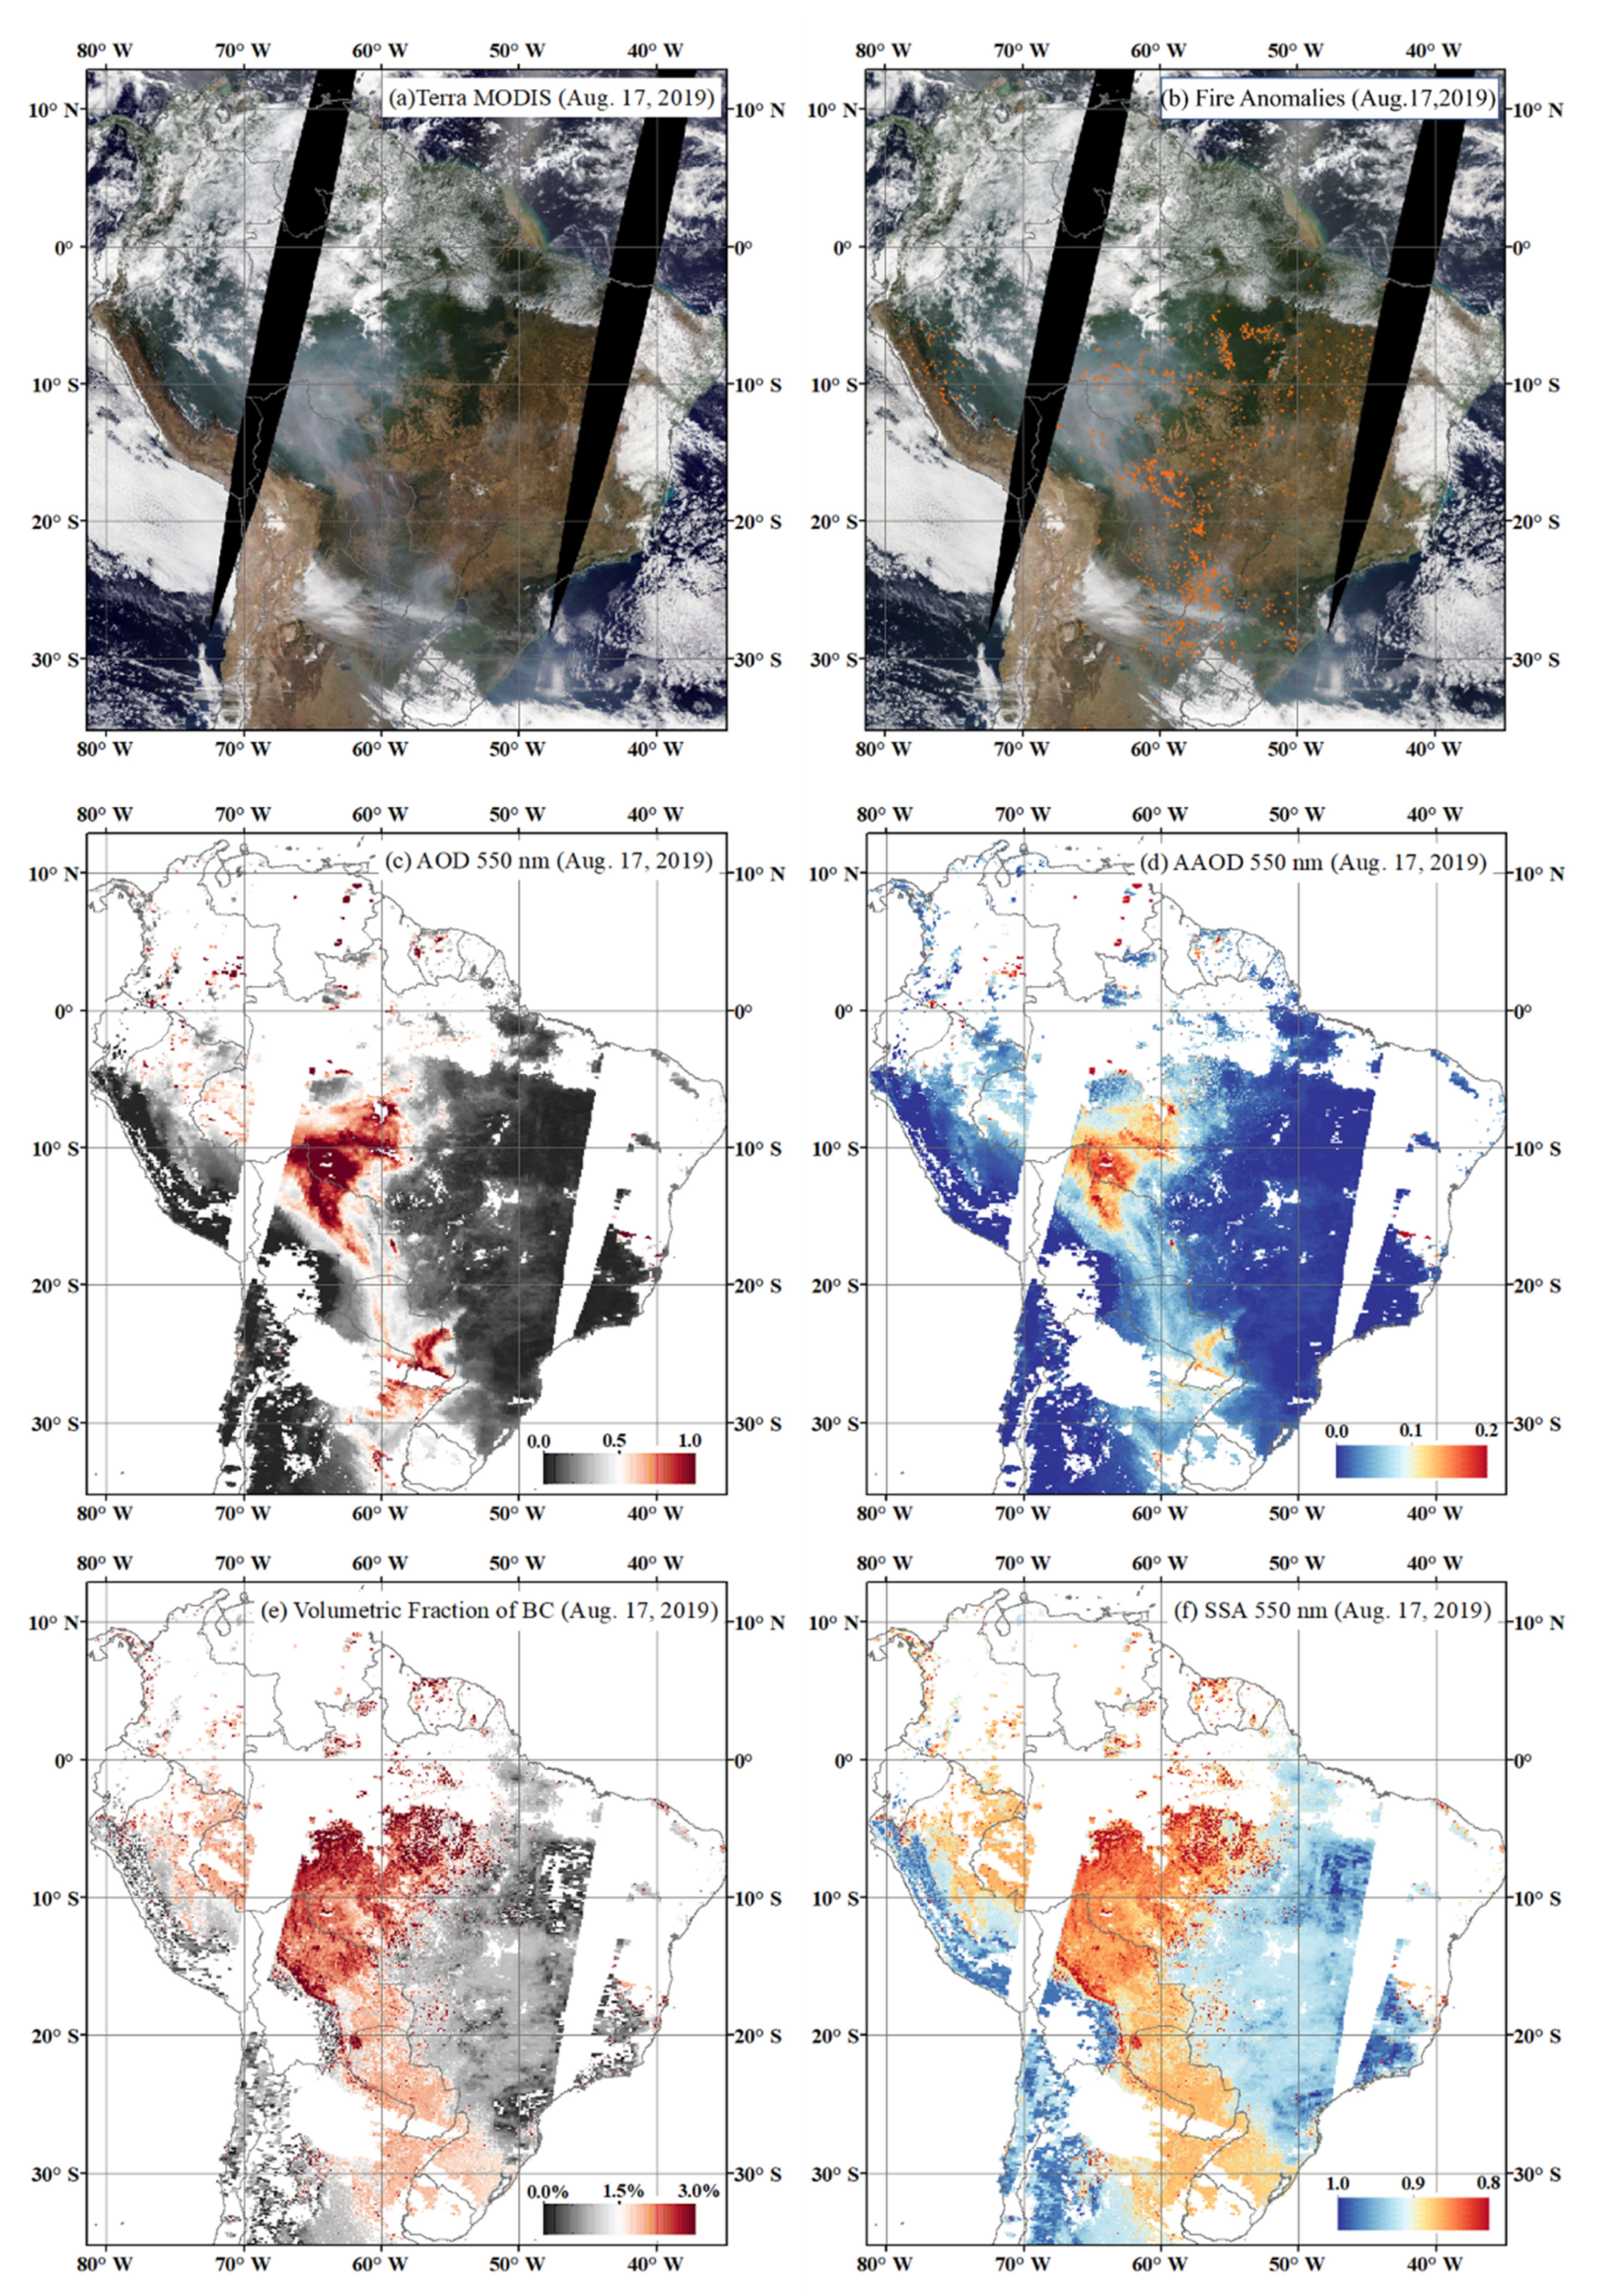 Remote Sensing | Free Full-Text | Severe Biomass-Burning Aerosol Pollution  during the 2019 Amazon Wildfire and Its Direct Radiative-Forcing Impact: A  Space Perspective from MODIS Retrievals | HTML